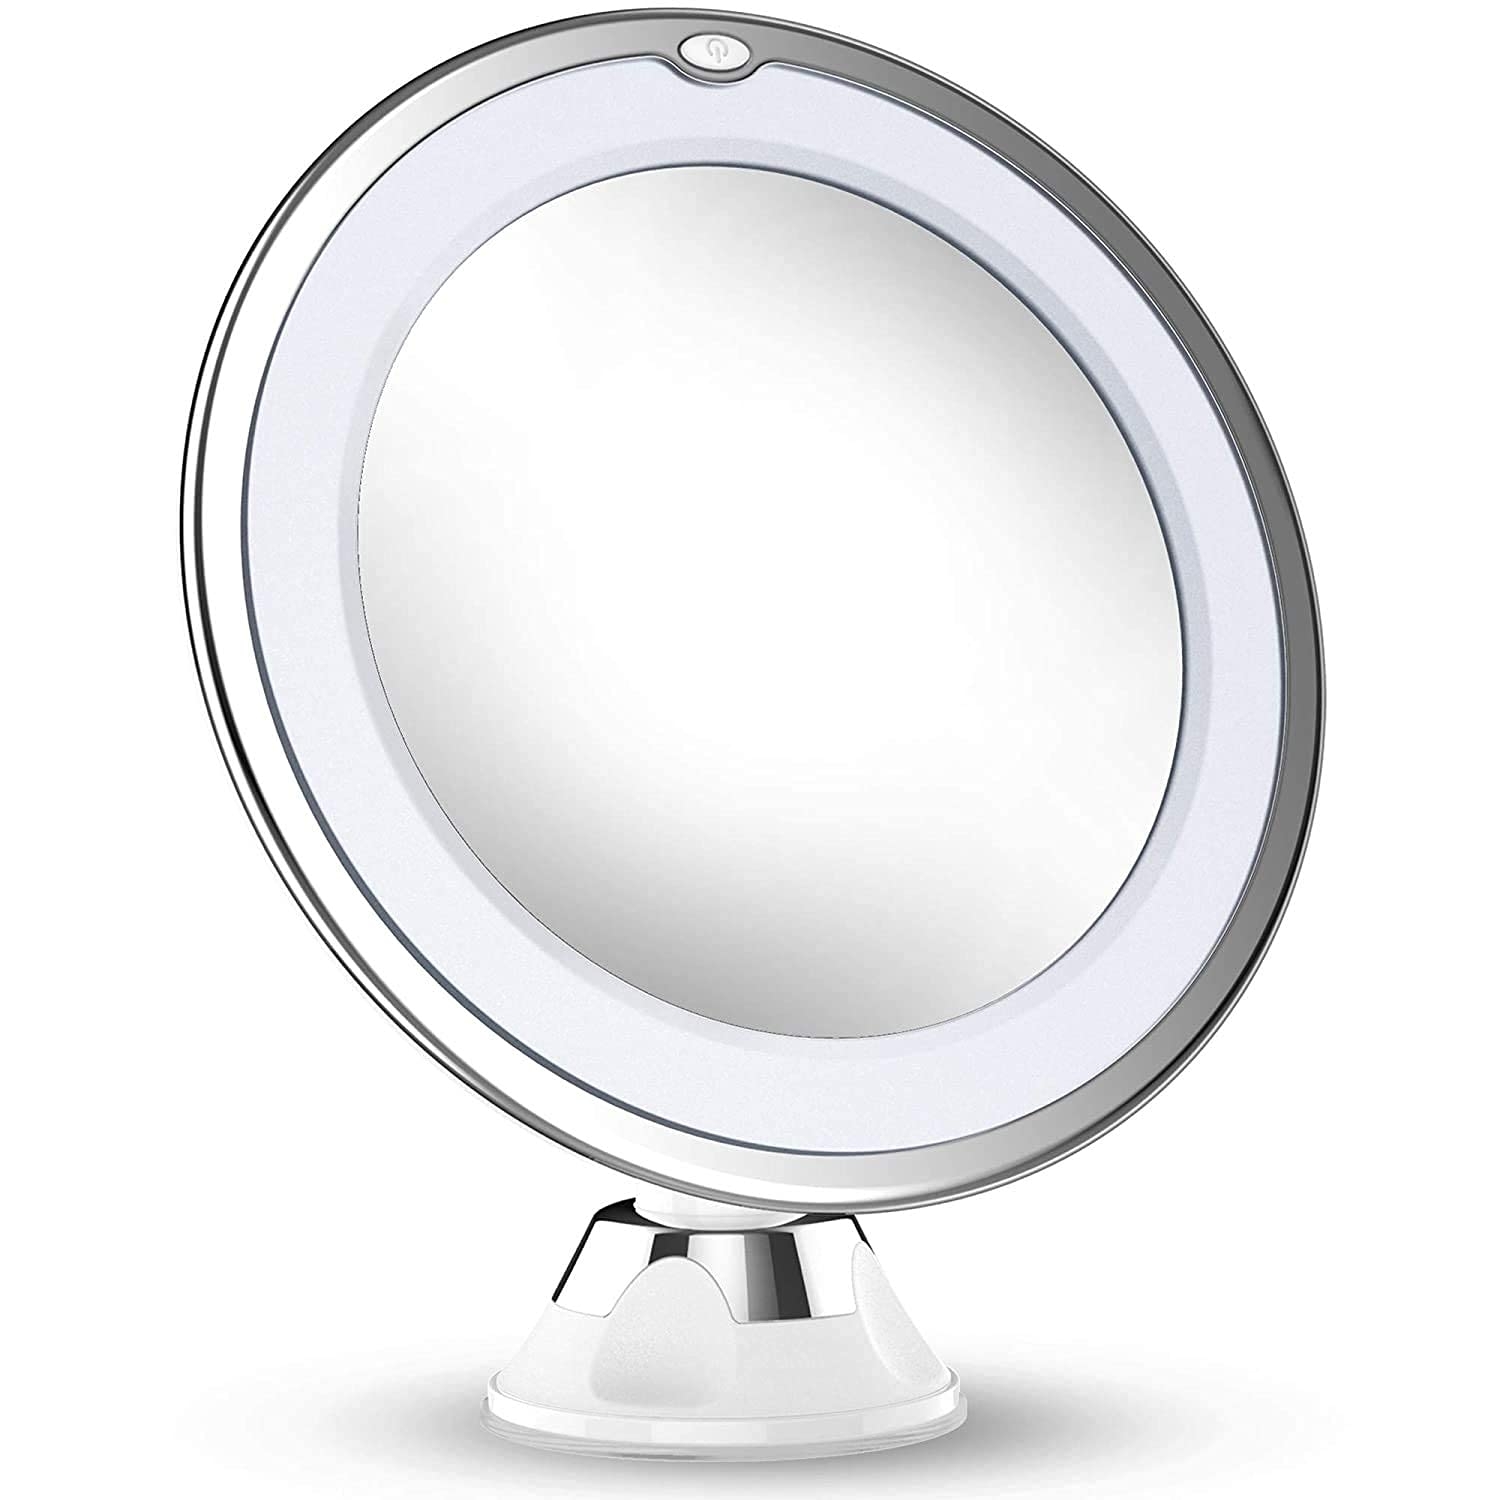 Updated 2021 Version 10X Magnifying Makeup Vanity Mirror with Lights, LED Lighted Portable Hand Cosmetic Magnification Light up Mirrors for Home Tabletop Bathroom Shower Travel